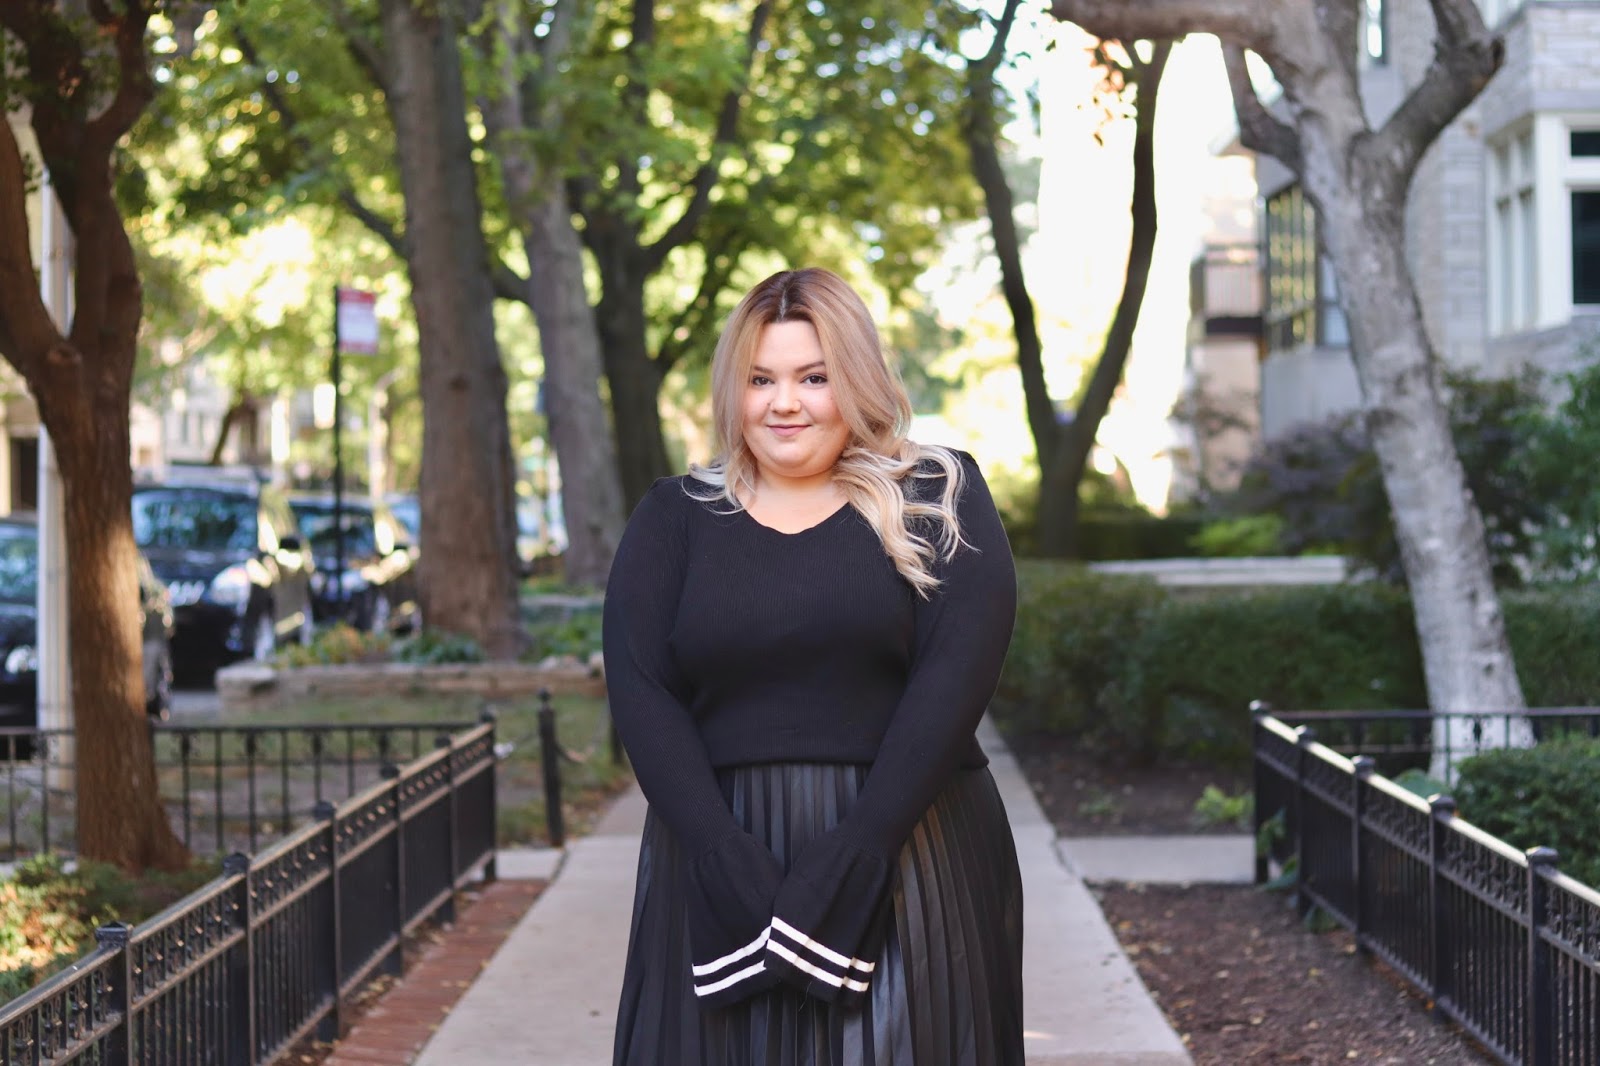 natalie craig, chicago fashion blogger, plus size fashion, Natalie in the city, affordable plus size clothing. eloquii Chicago, eloquii sweater, plus size clothes, curves and confidence, midwest blogger, digital influencer, influencer, pleated plus size maxi skirts, fall fashion 2017, plus size fall fashion